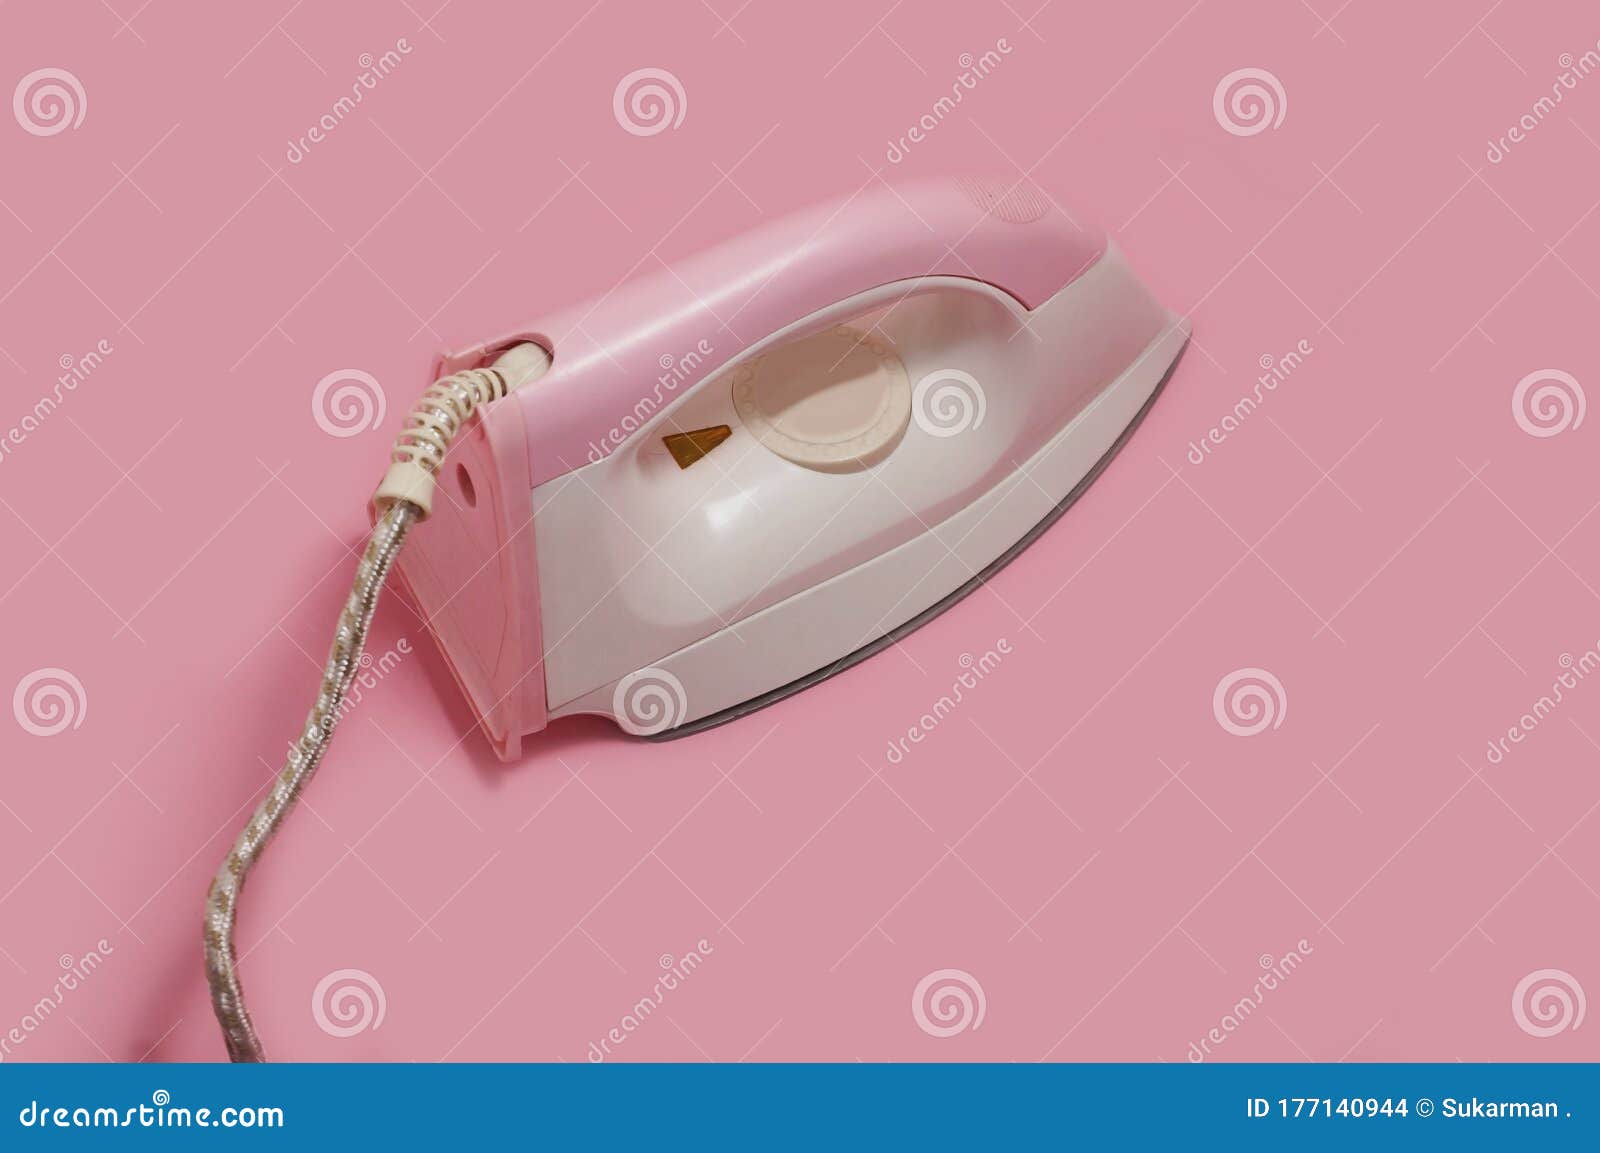 Pink Electric Iron on Pink Background Stock Photo - Image of cable, heat:  177140944